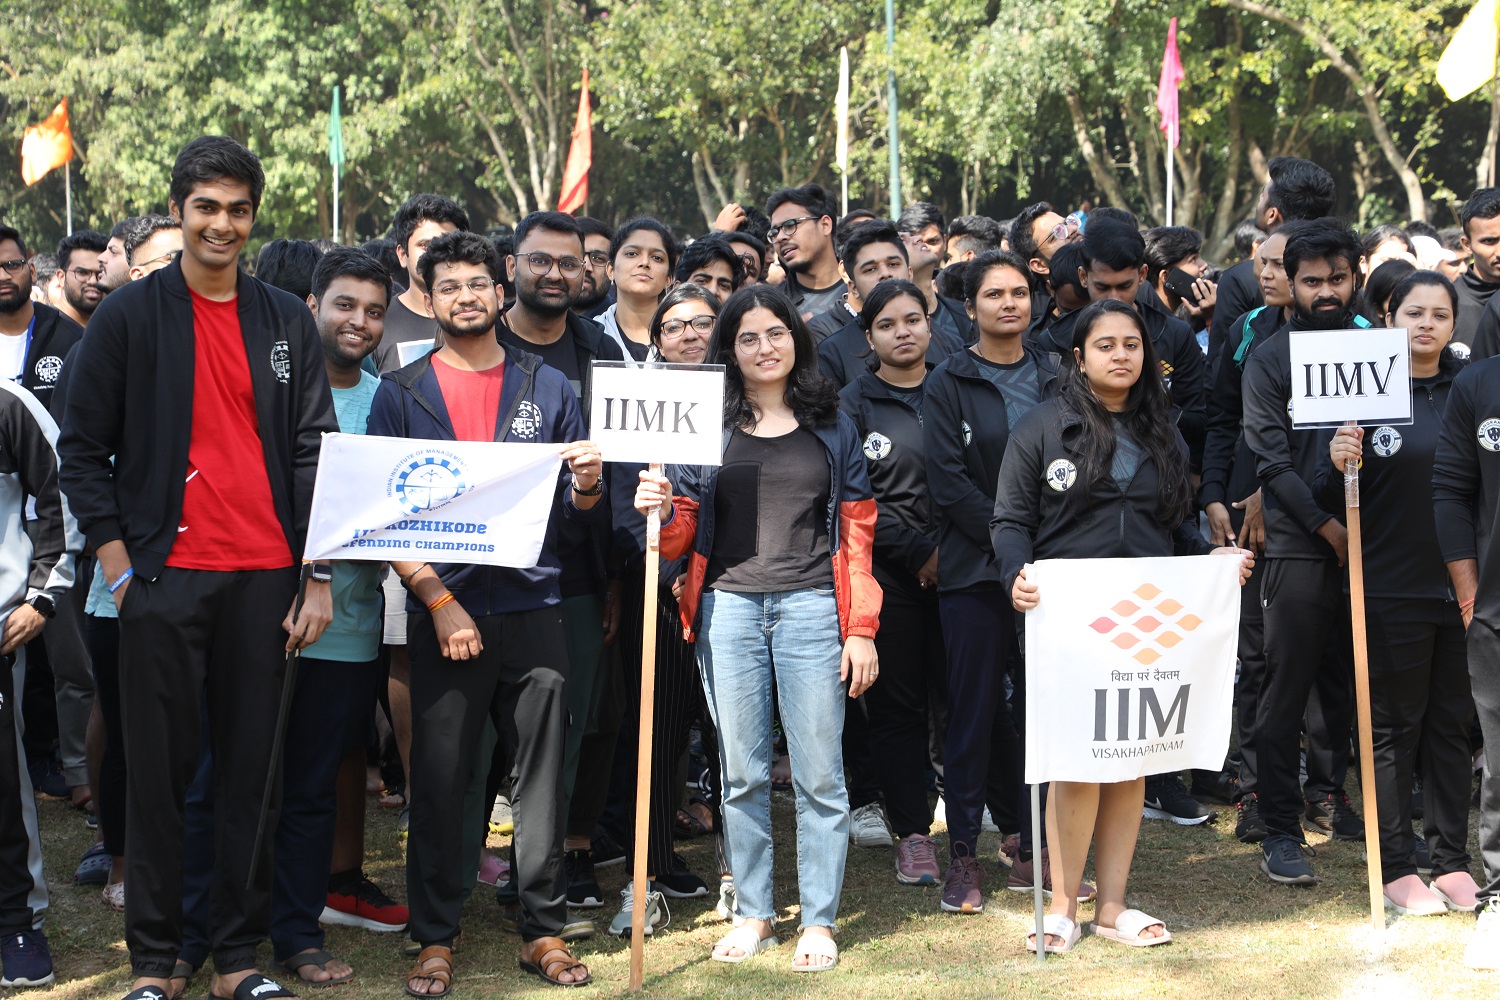 Participants from IIM Kozhikode and IIM Visakhapatnam during the inaugural ceremony.